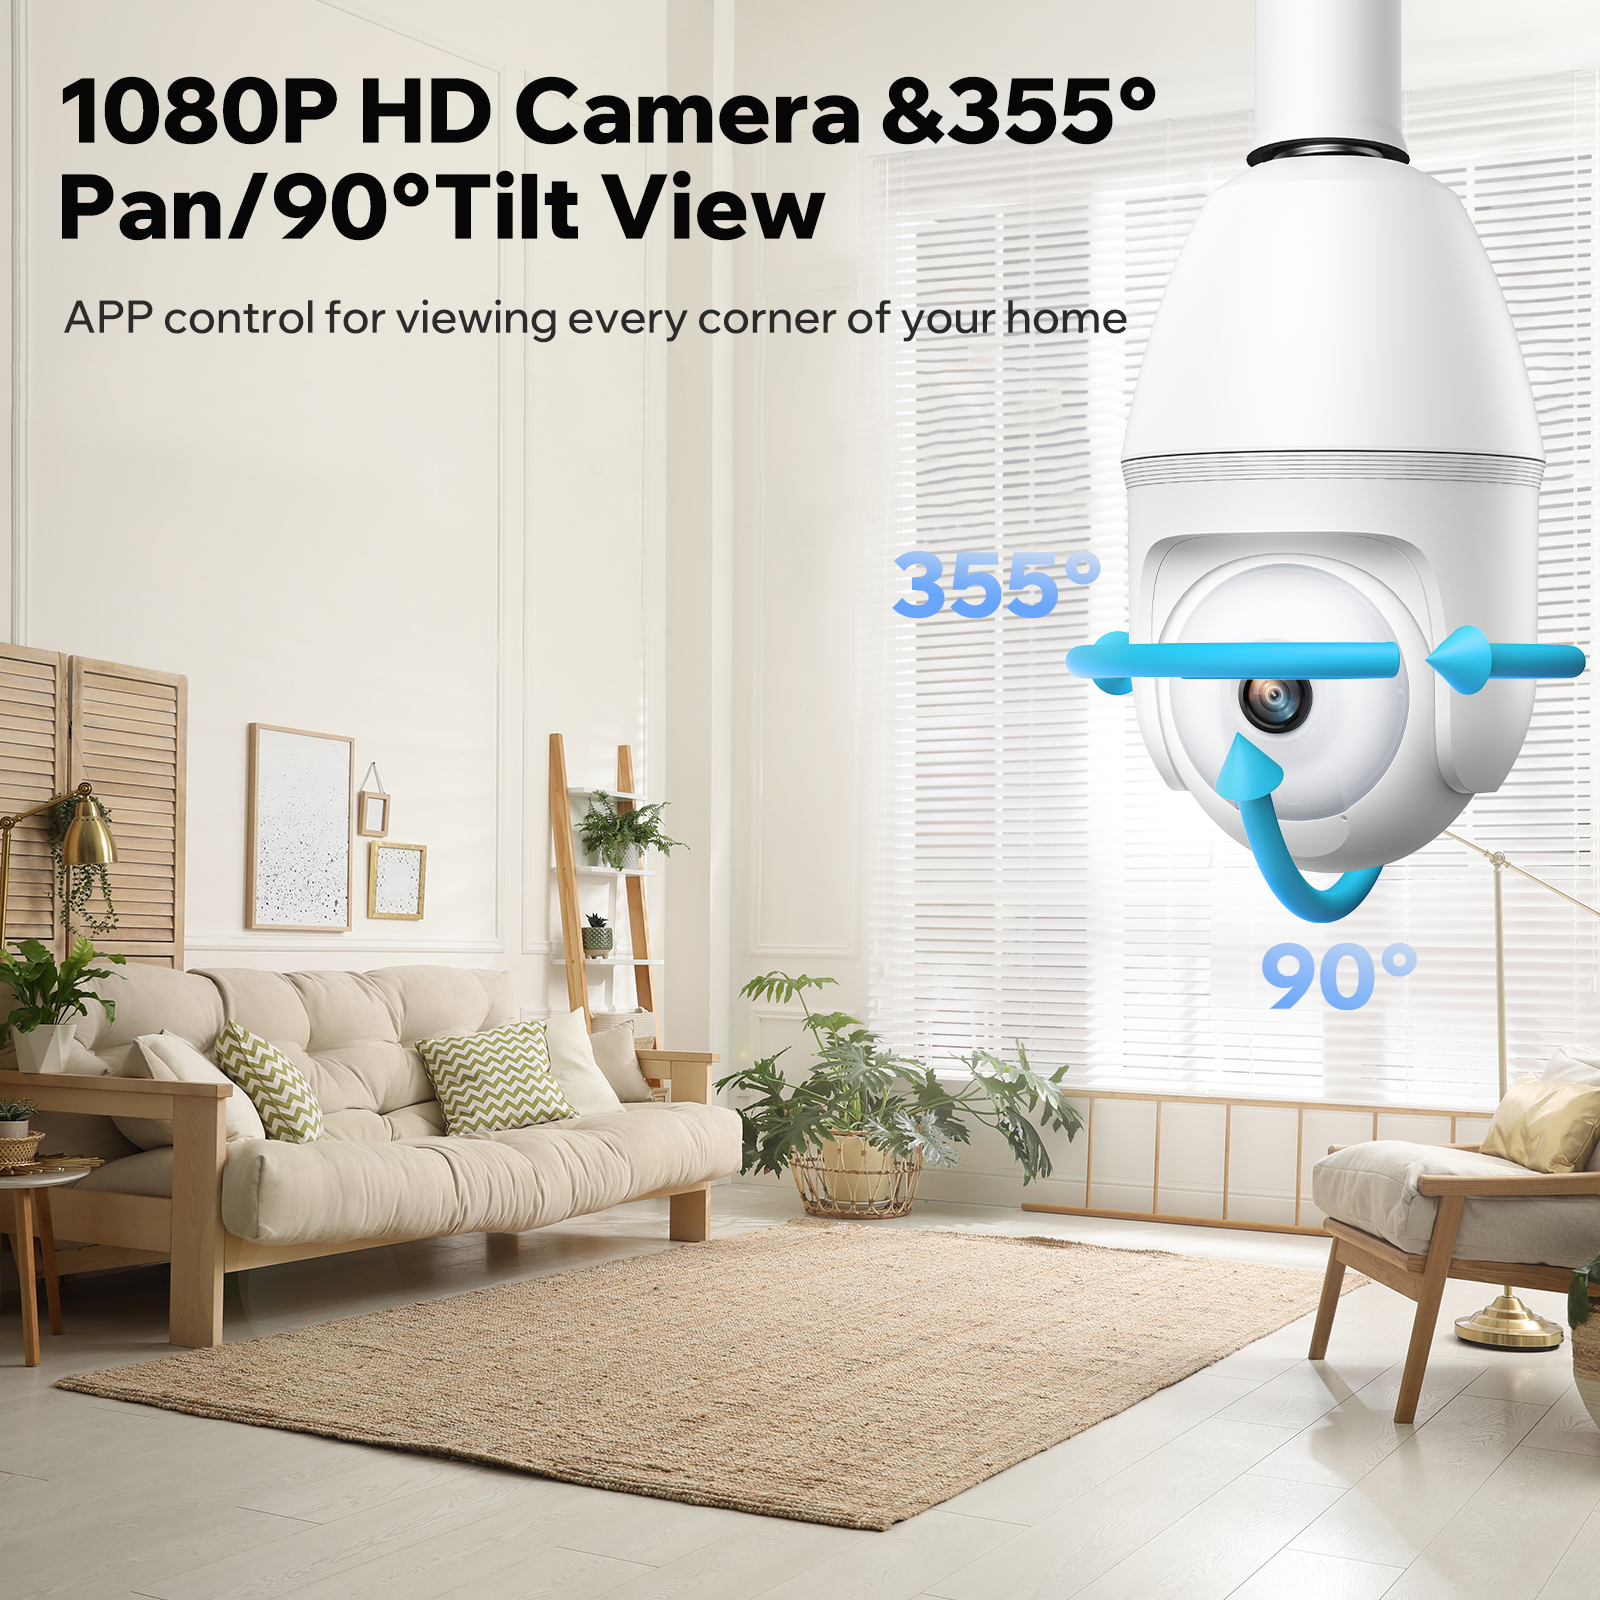  1080P 2MP WiFi Security Camera for Home Outdoor Bulb Camera Support 2.4G/5G WiFi, Motion Detection and Siren Alarm